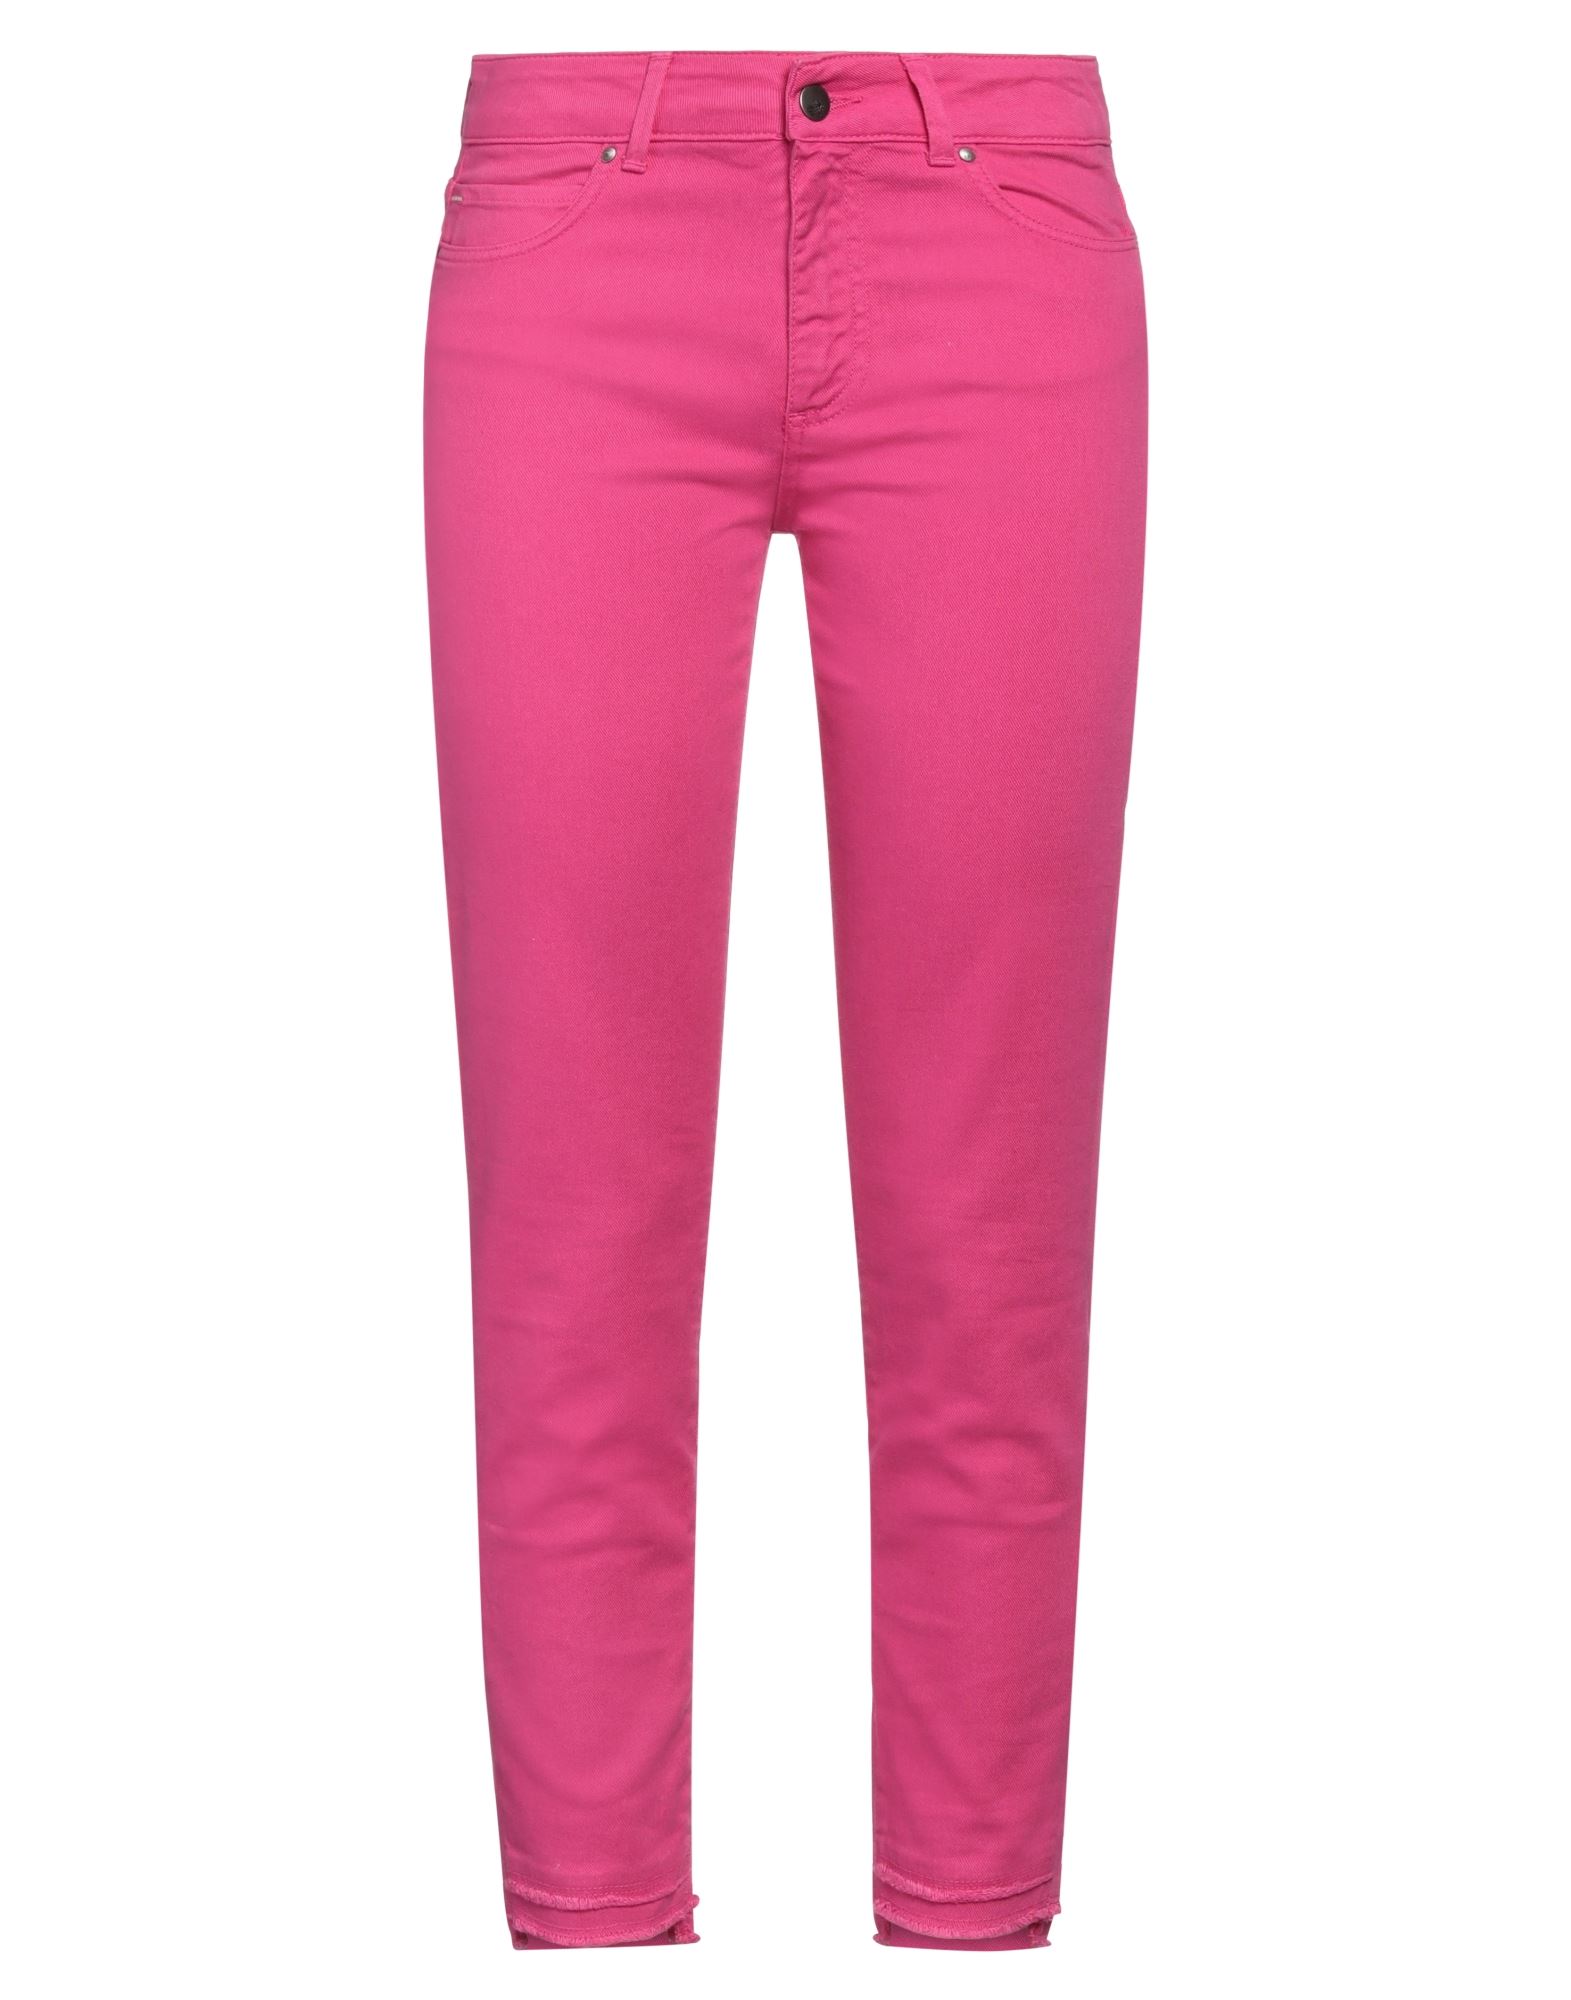 Cigala's Pants In Pink